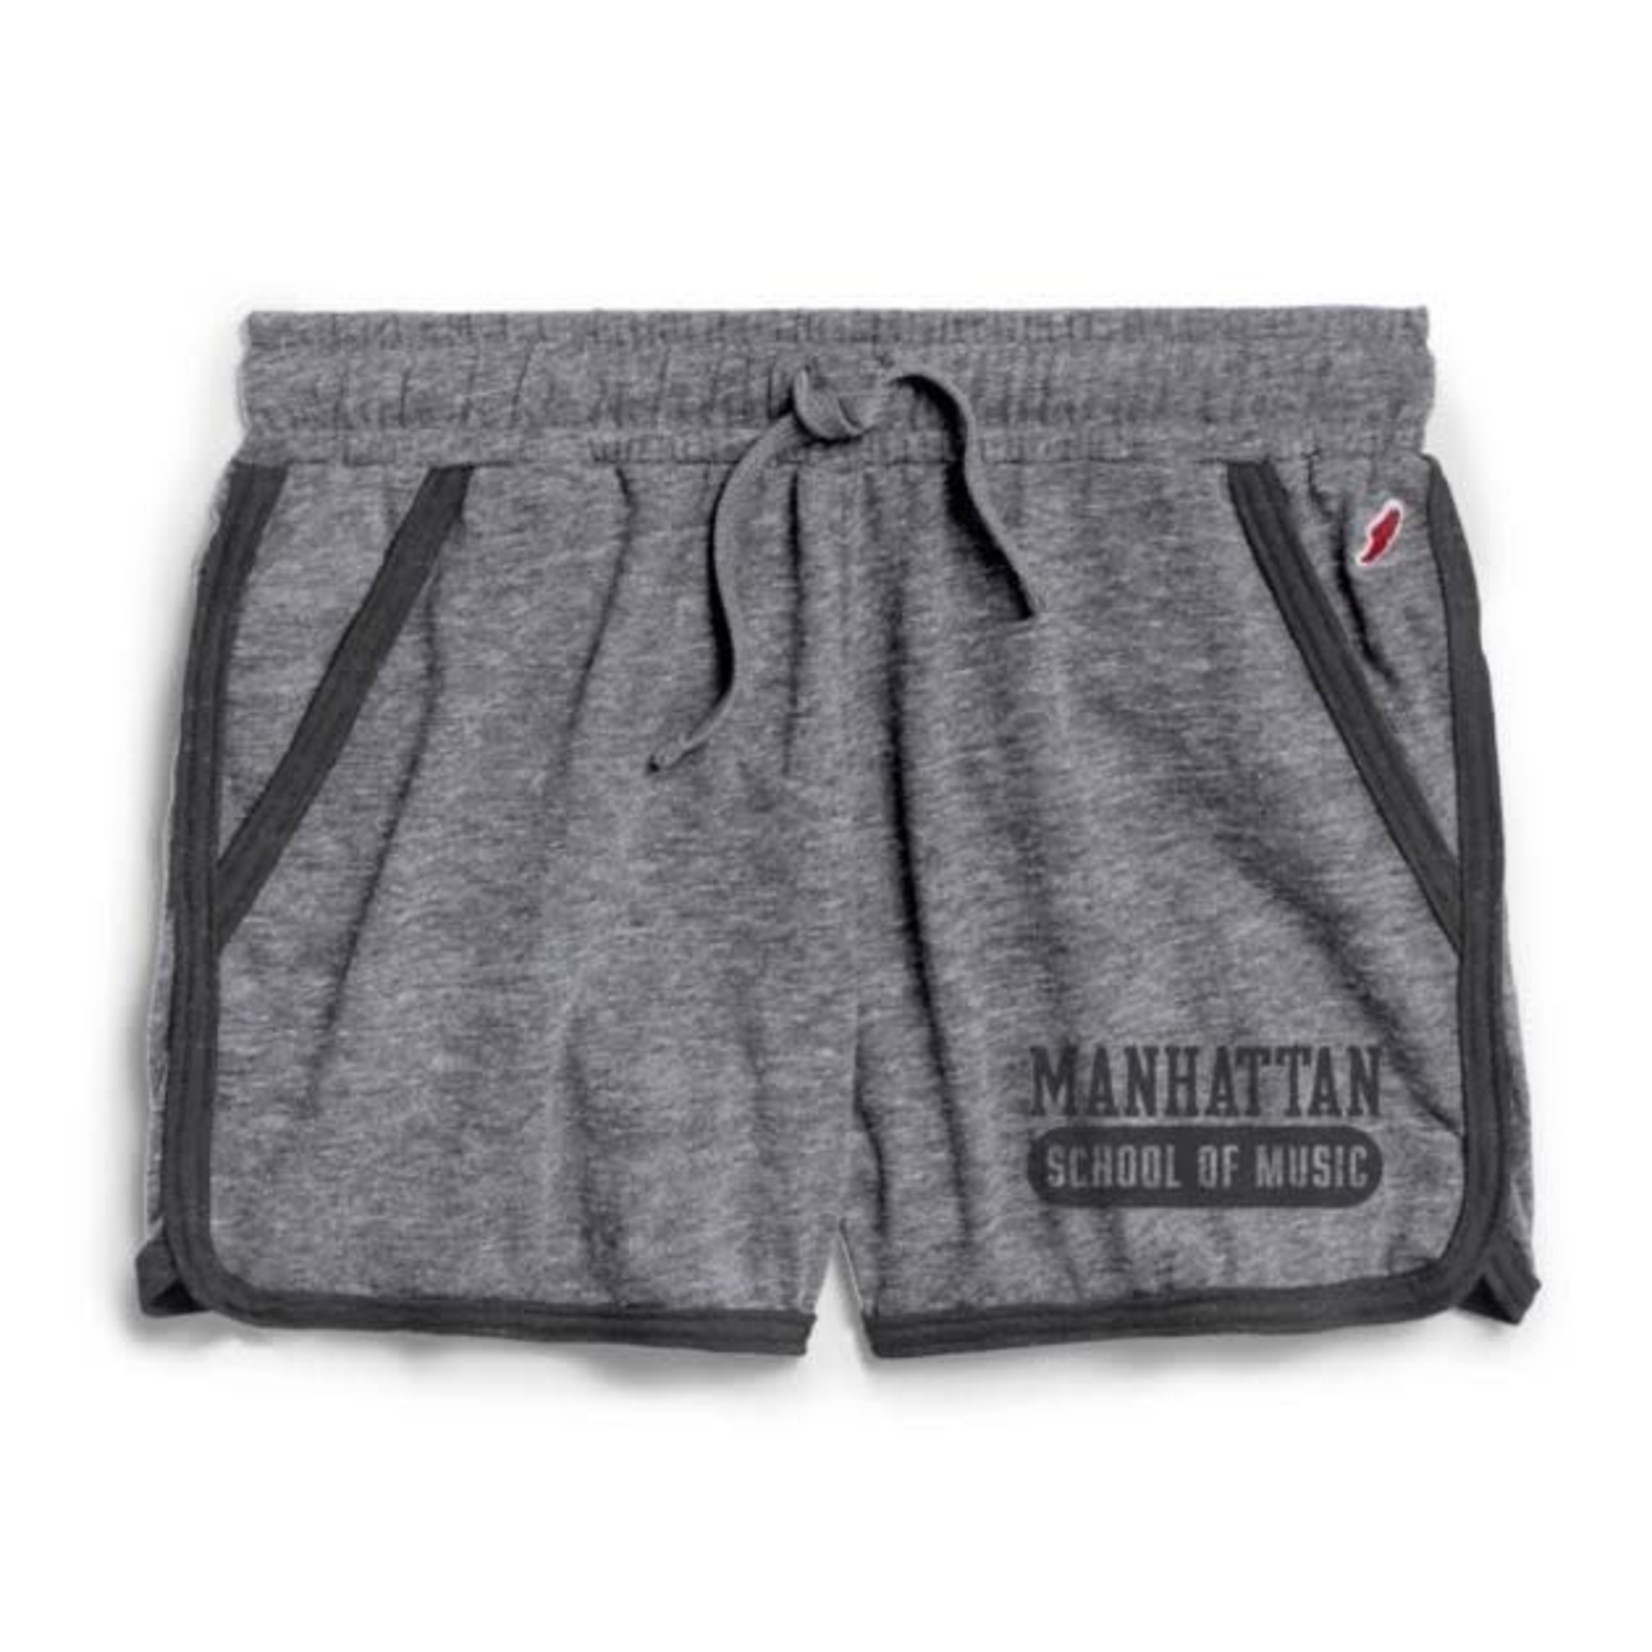 shorts: gray intramural FINAL SALE CLEARANCE size LARGE